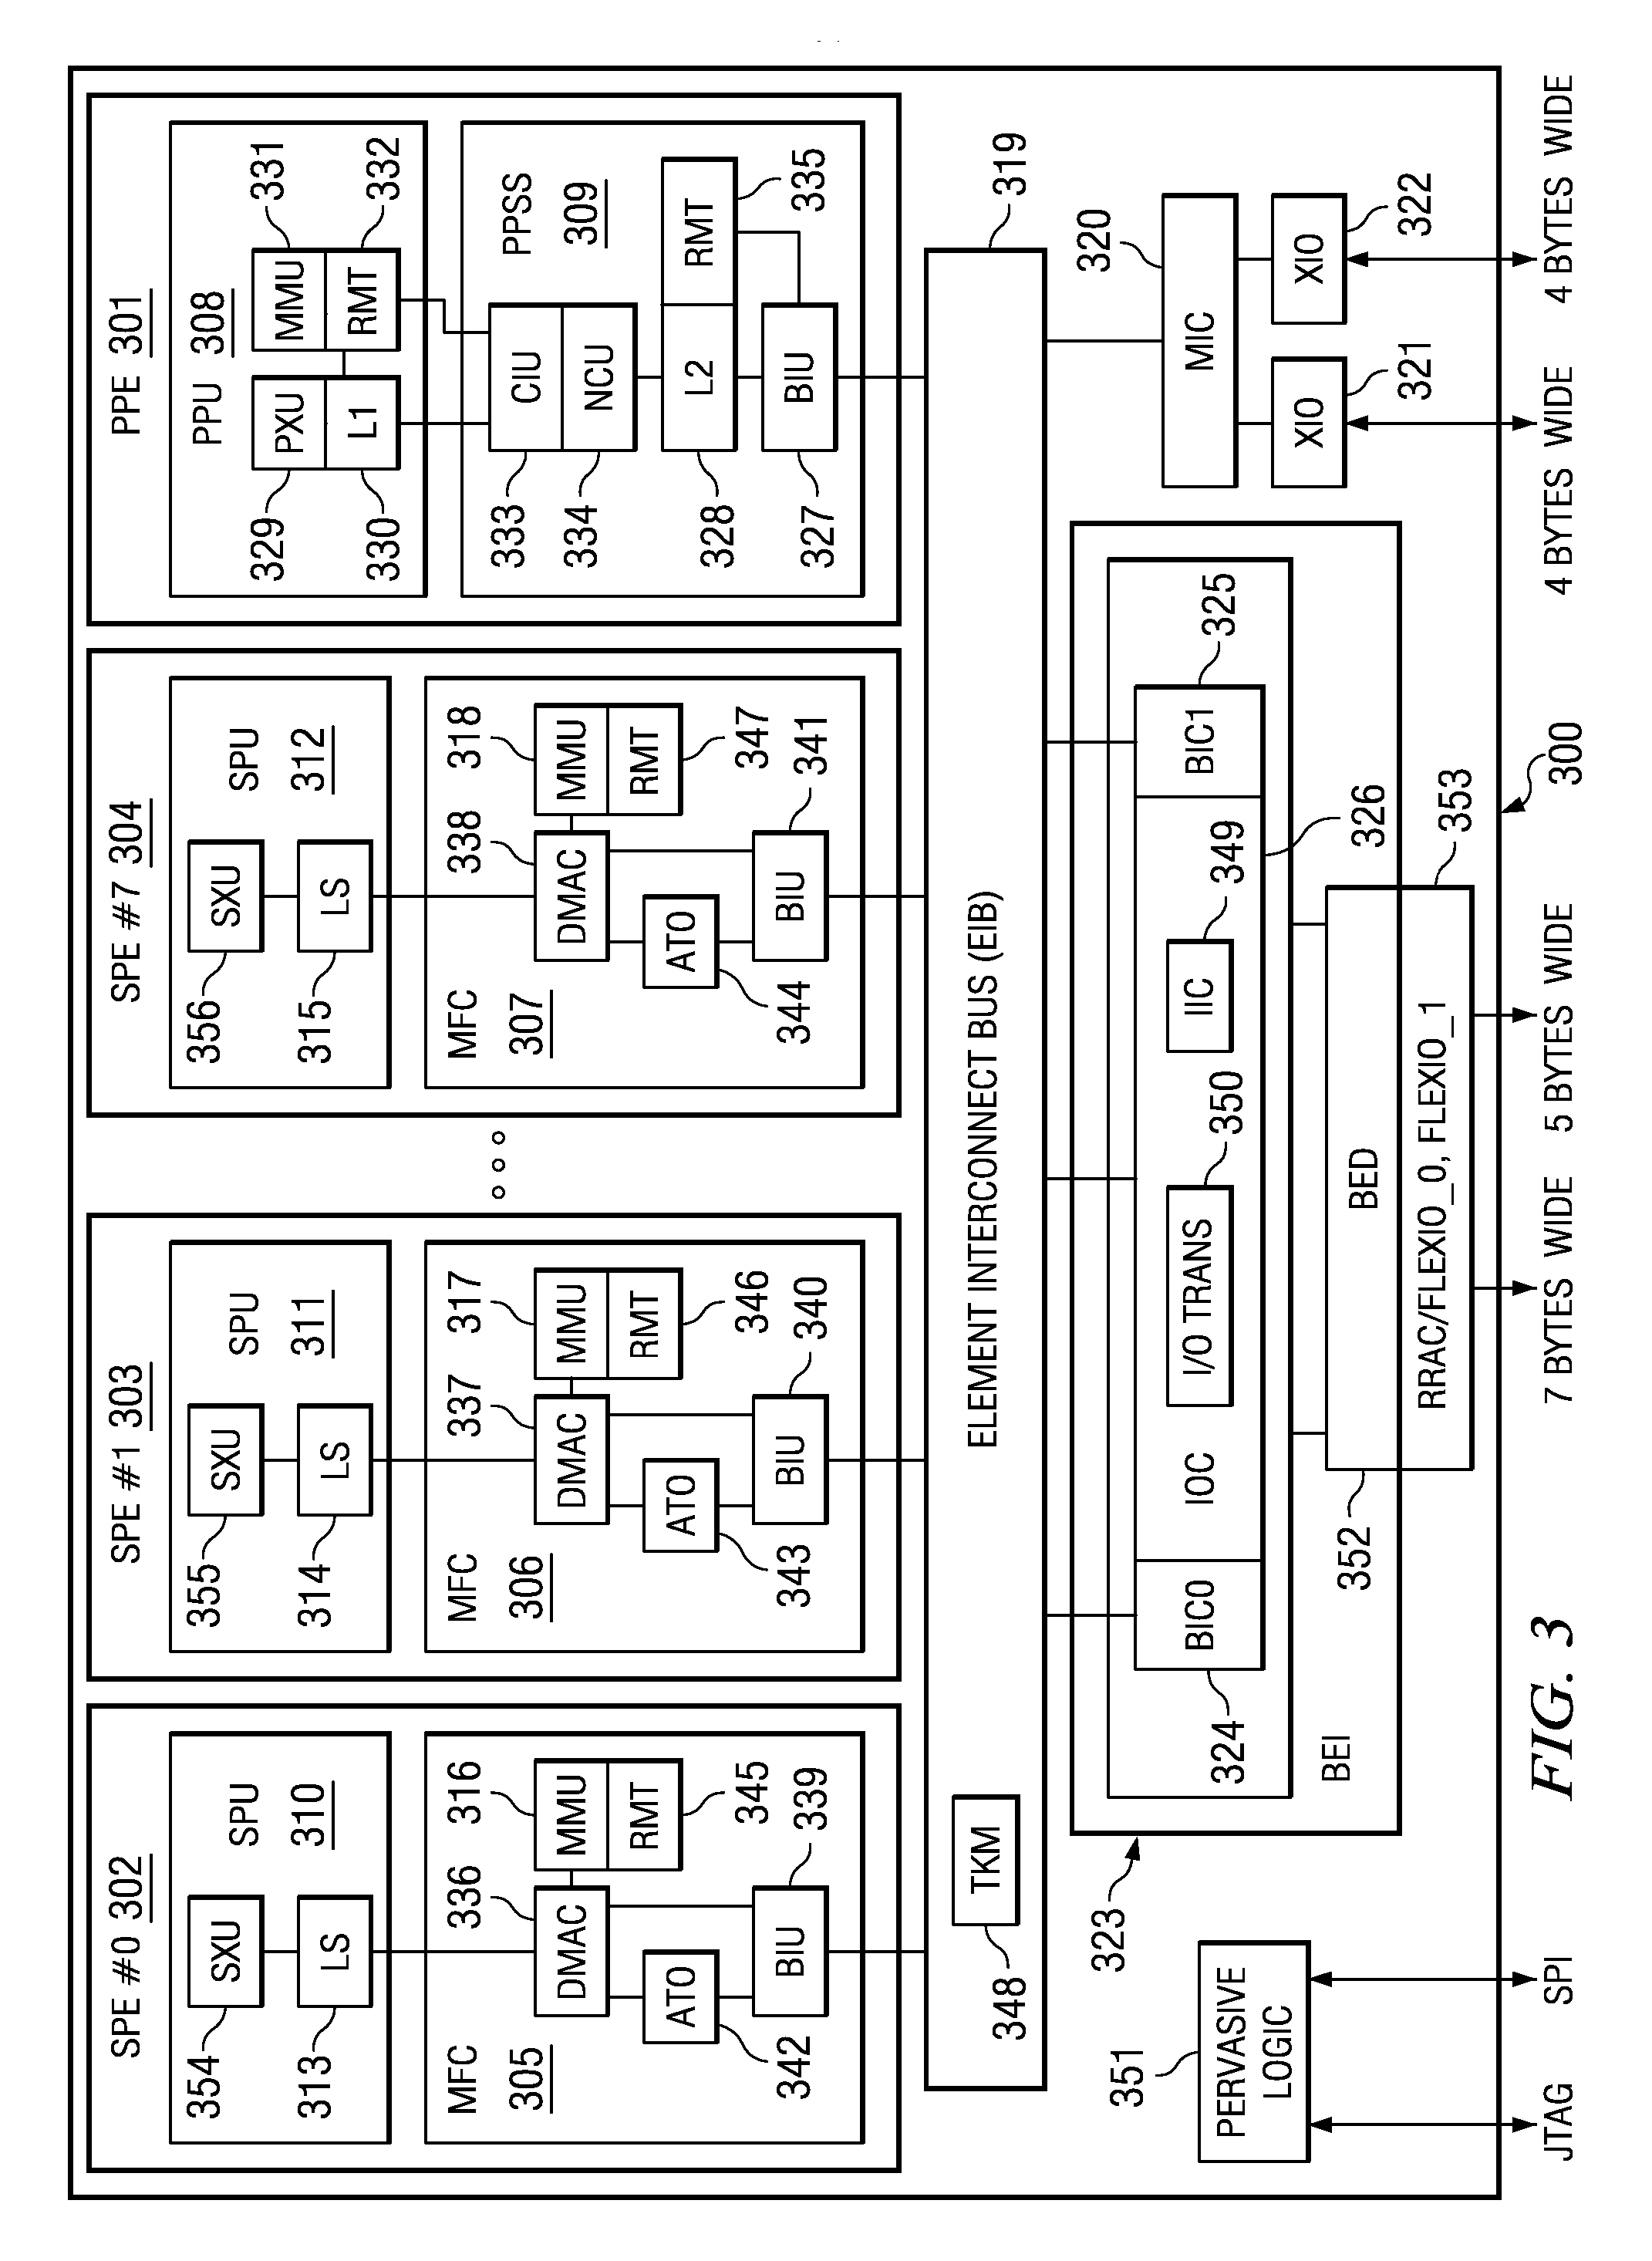 Dynamically adapting software for reducing a thermal state of a processor core based on its thermal index